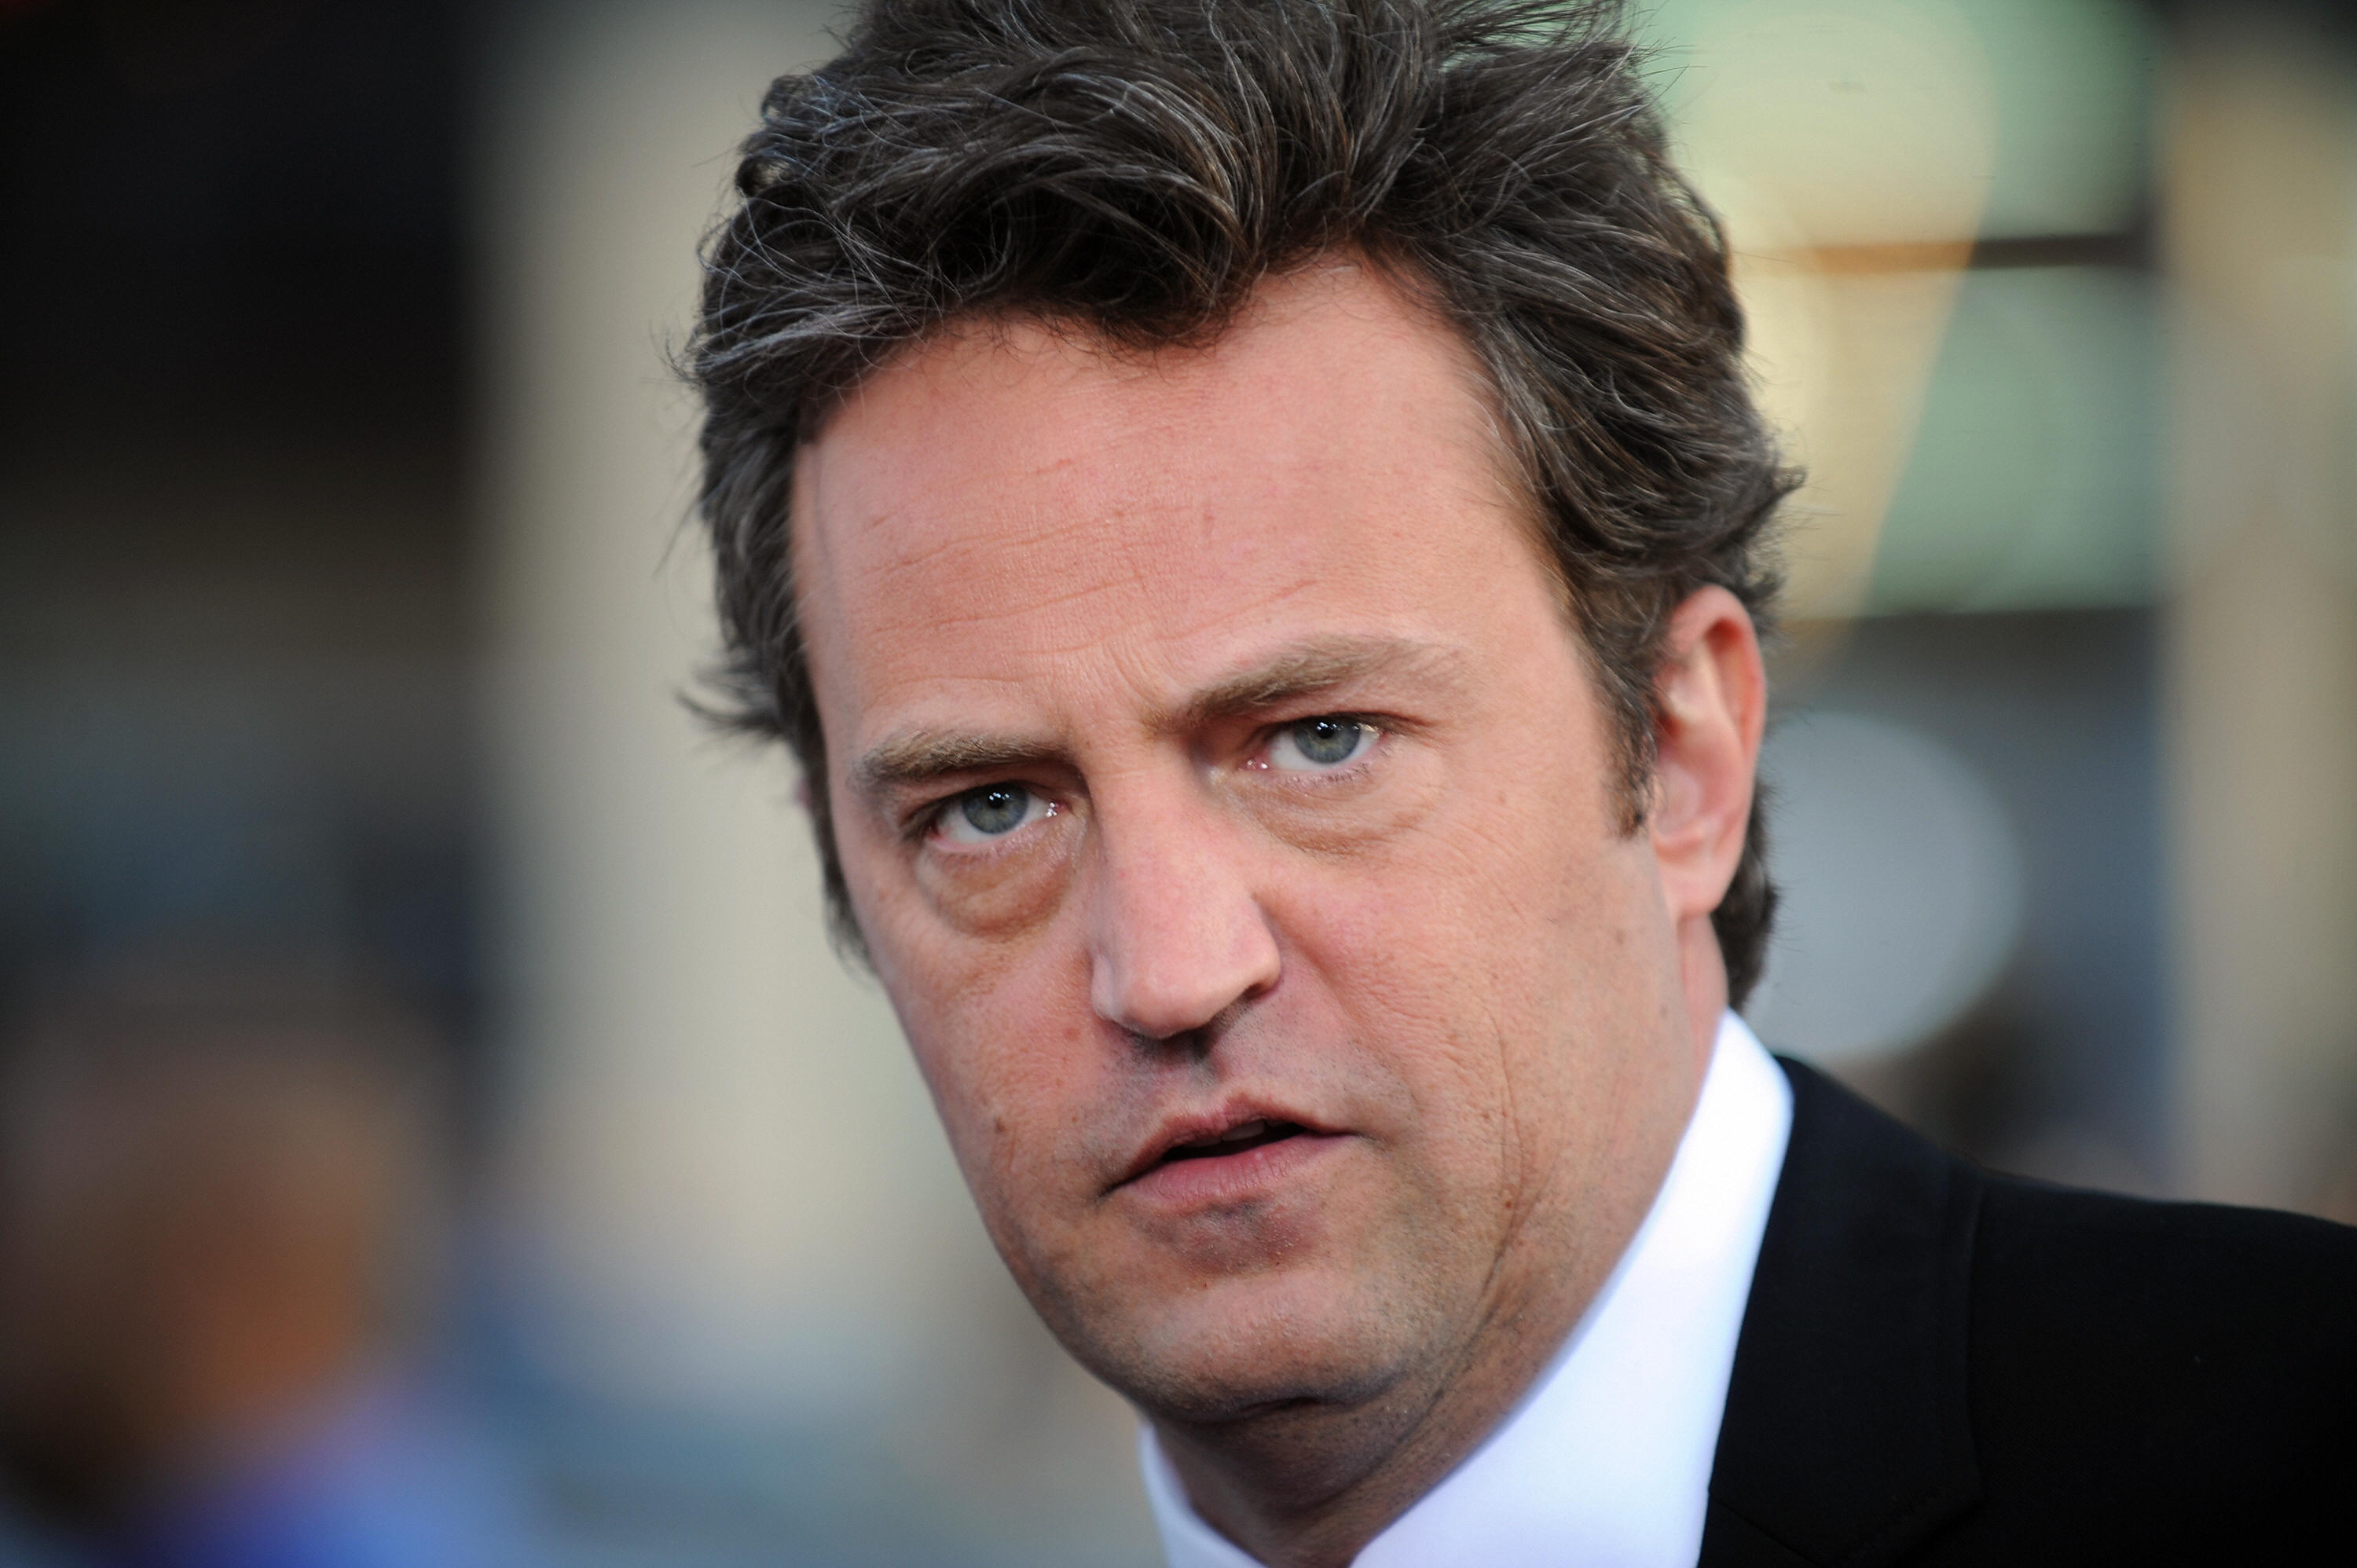 Matthew Perry at the Los Angeles premiere of "17 Again" in Hollywood, California, on April 14, 2009 | Source: Getty Images